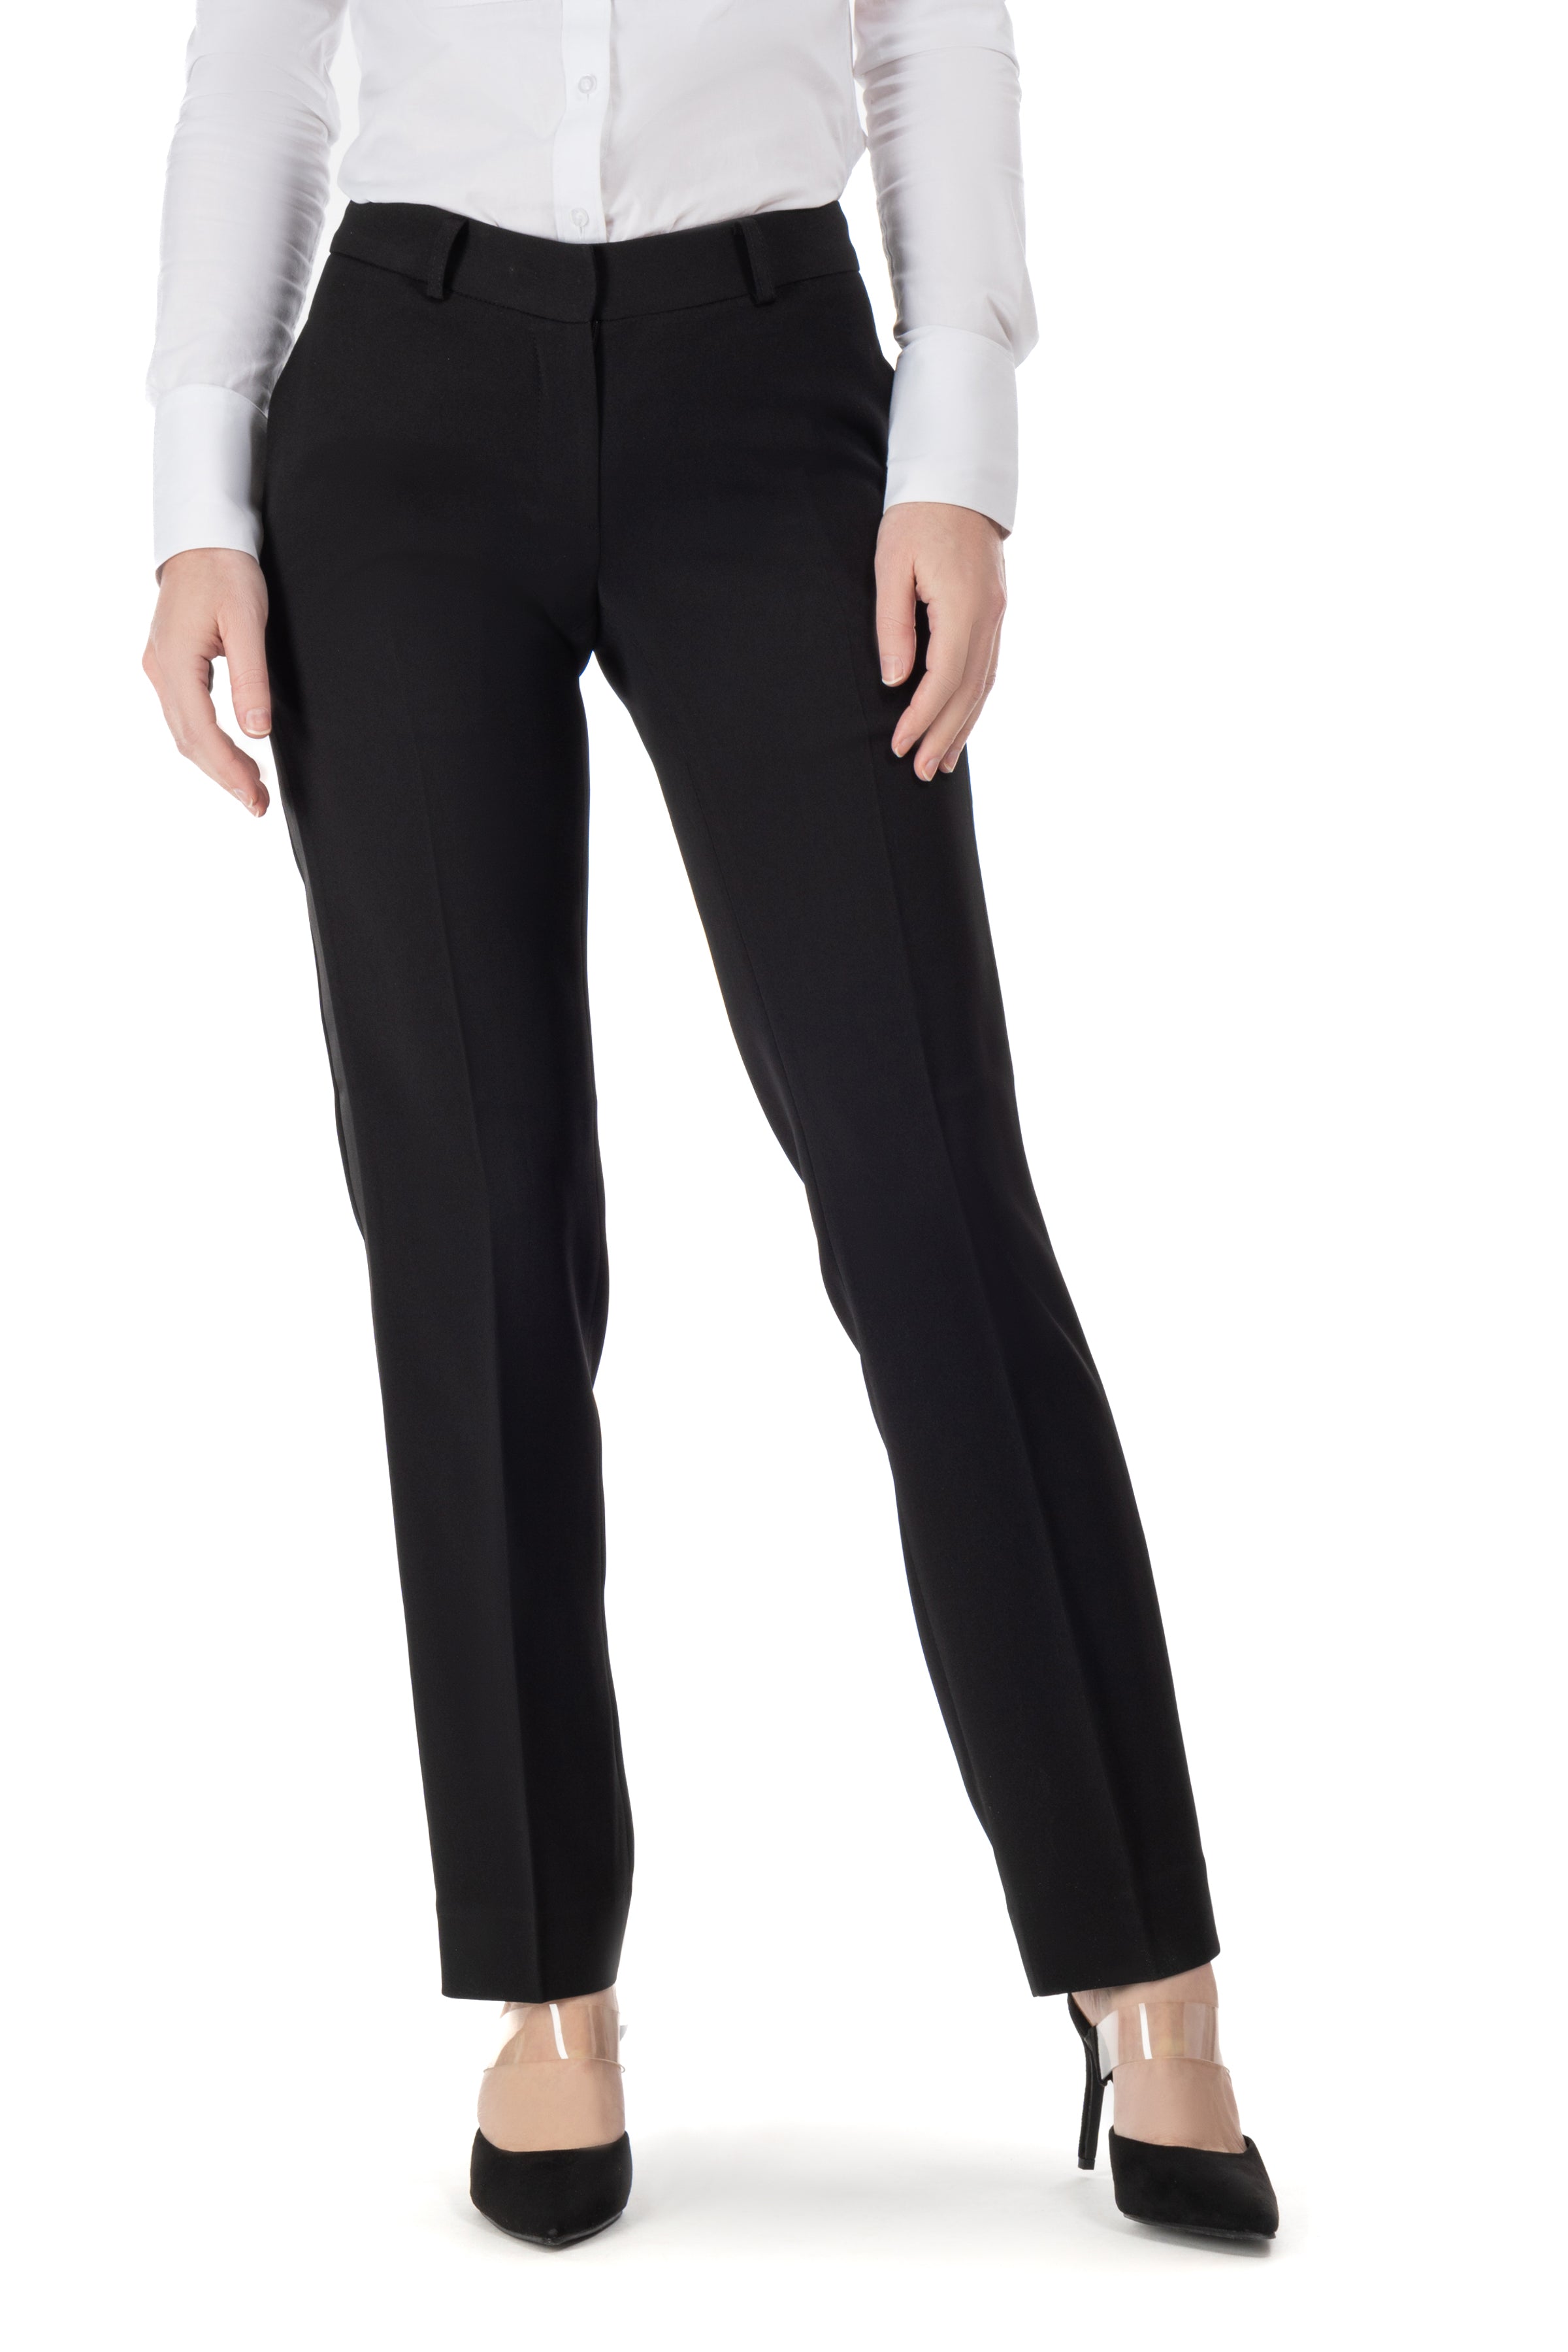 High Waisted Tapered Trousers, Black Dressy Tuxedo Pants for Ladies, Pants  for Women Suit, Elegant Slim Leg Formal Pants, Tailored Pants -  Norway